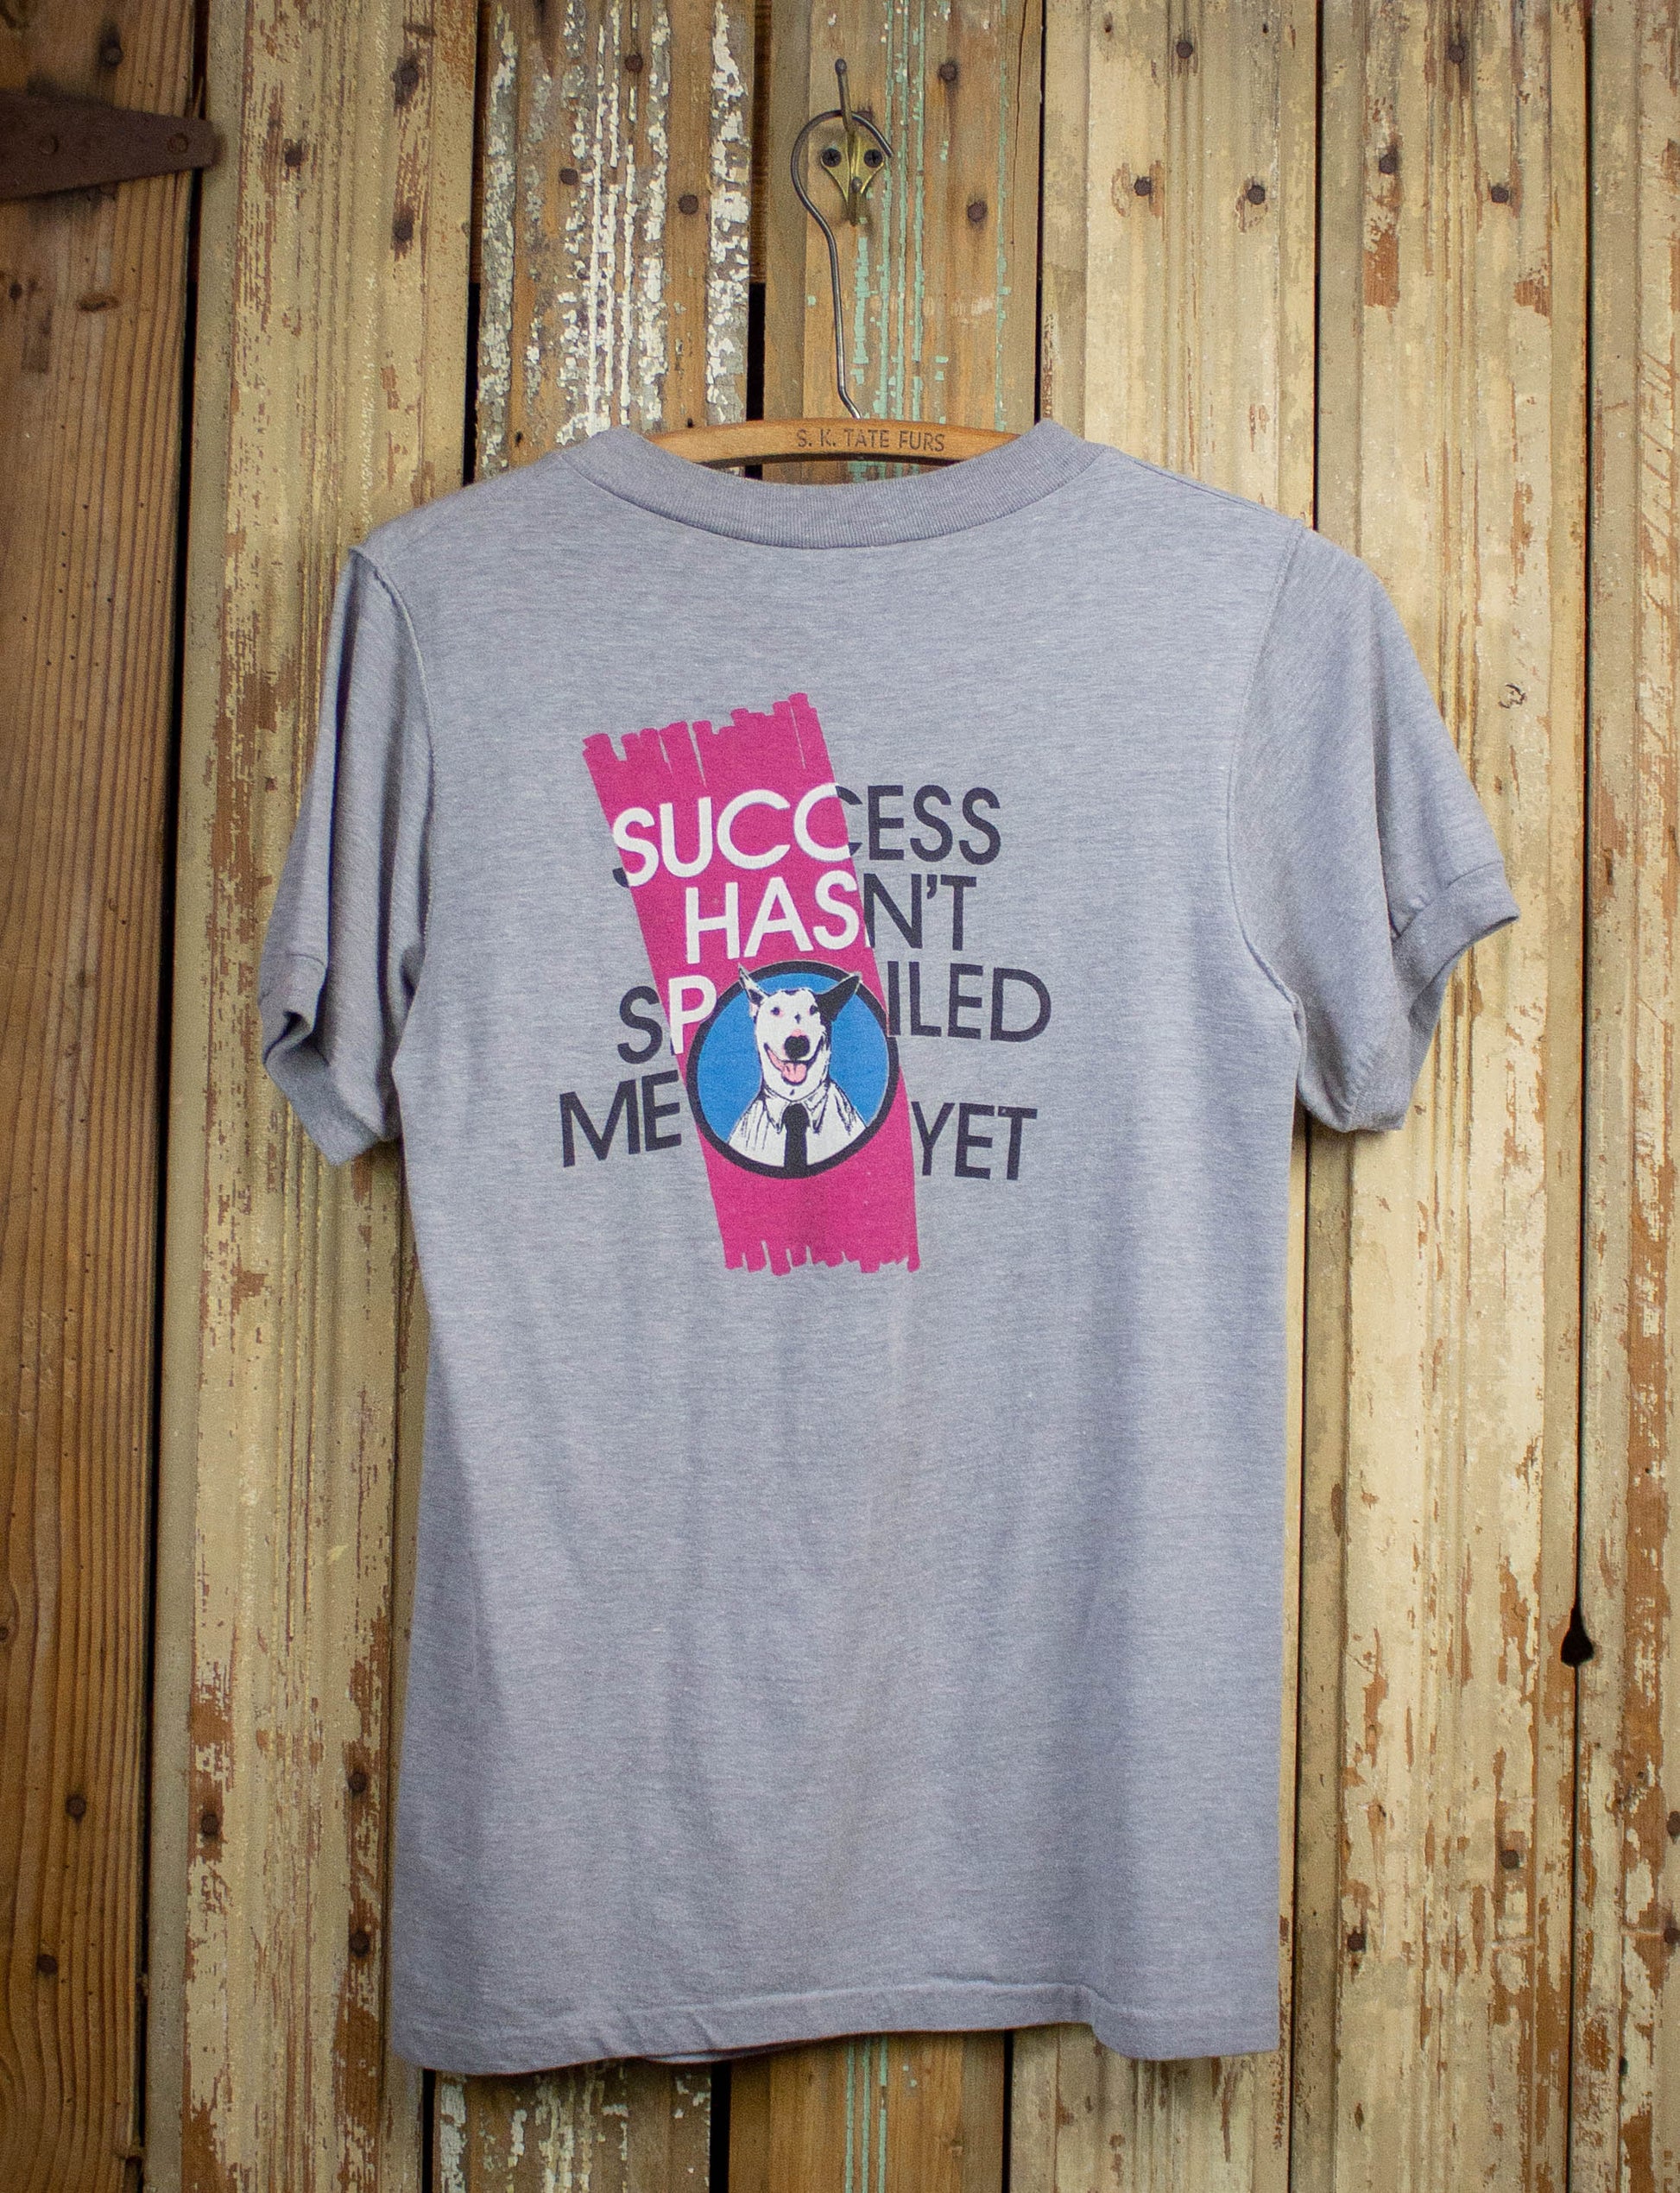 Vintage Rick Springfield Success Hasn't Spoiled Me Yet Concert T Shirt 1982 Gray Small